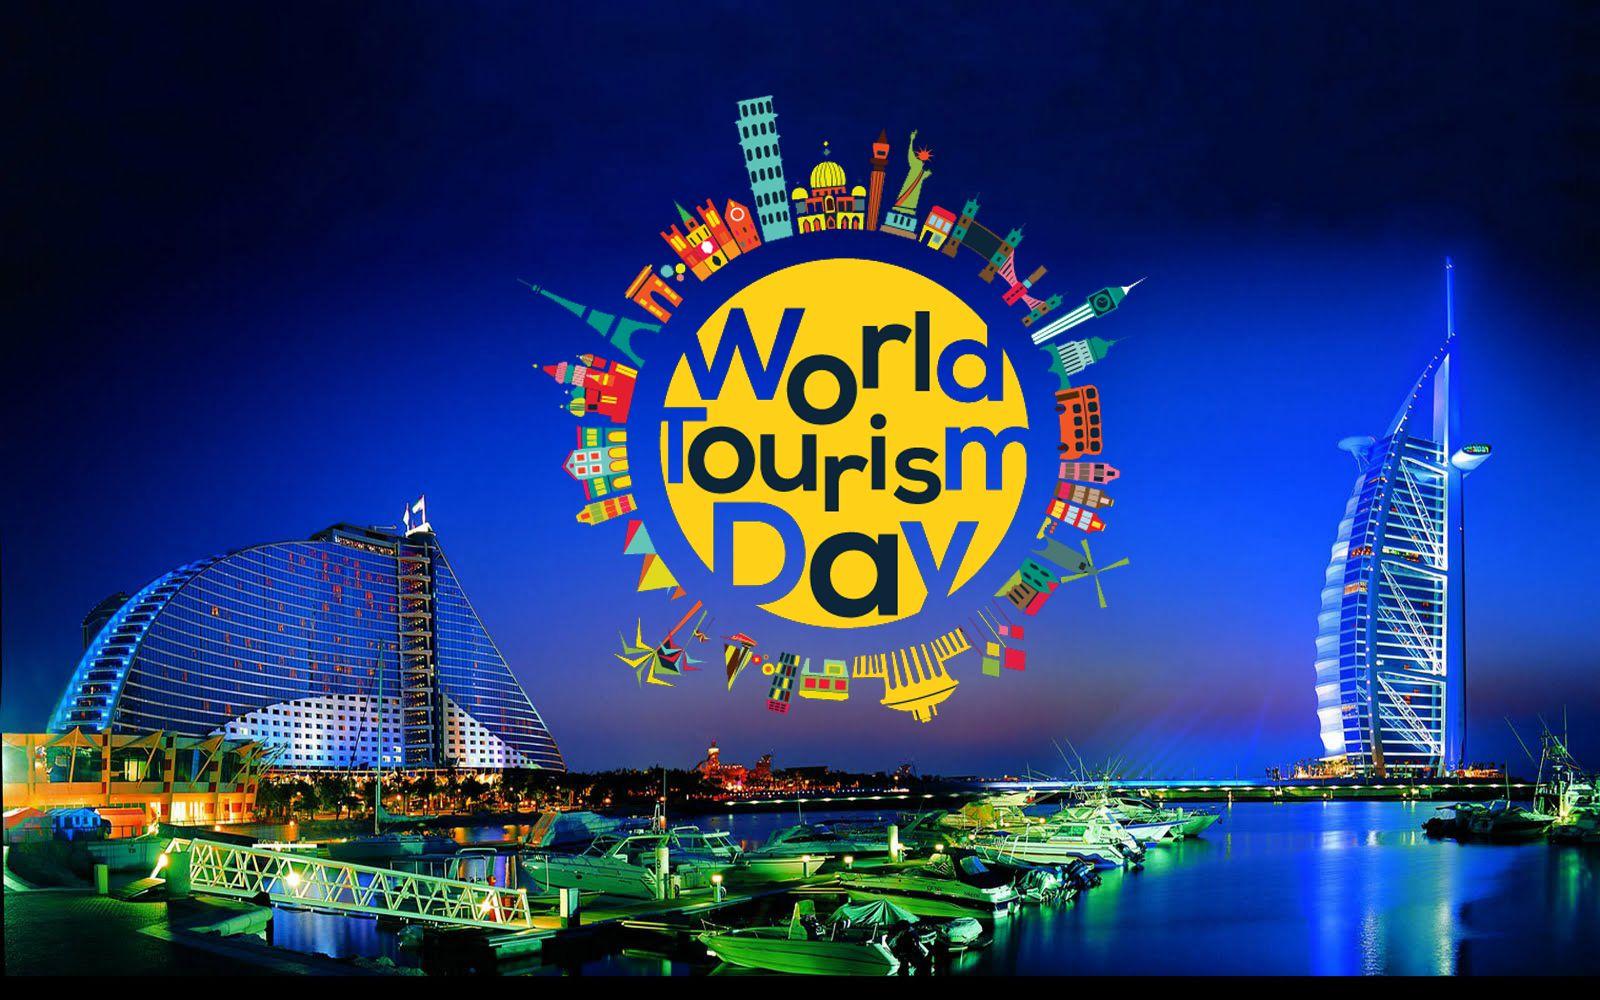 Best World Tourism Day Quotes, Image & Wallpaper for Facebook